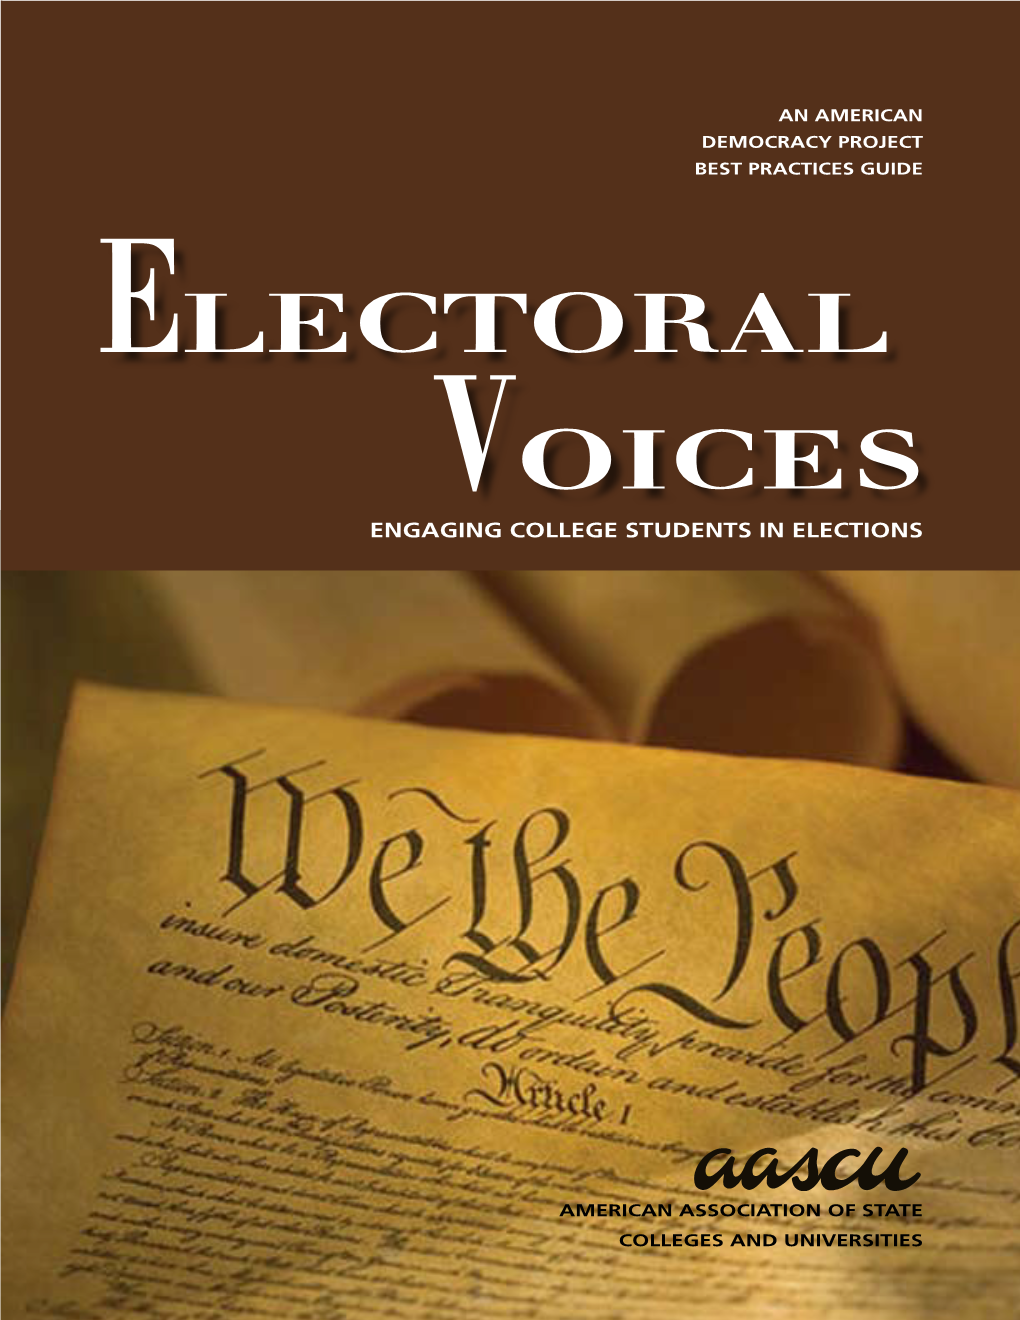 Electoral Voices: Engaging College Students in Elections